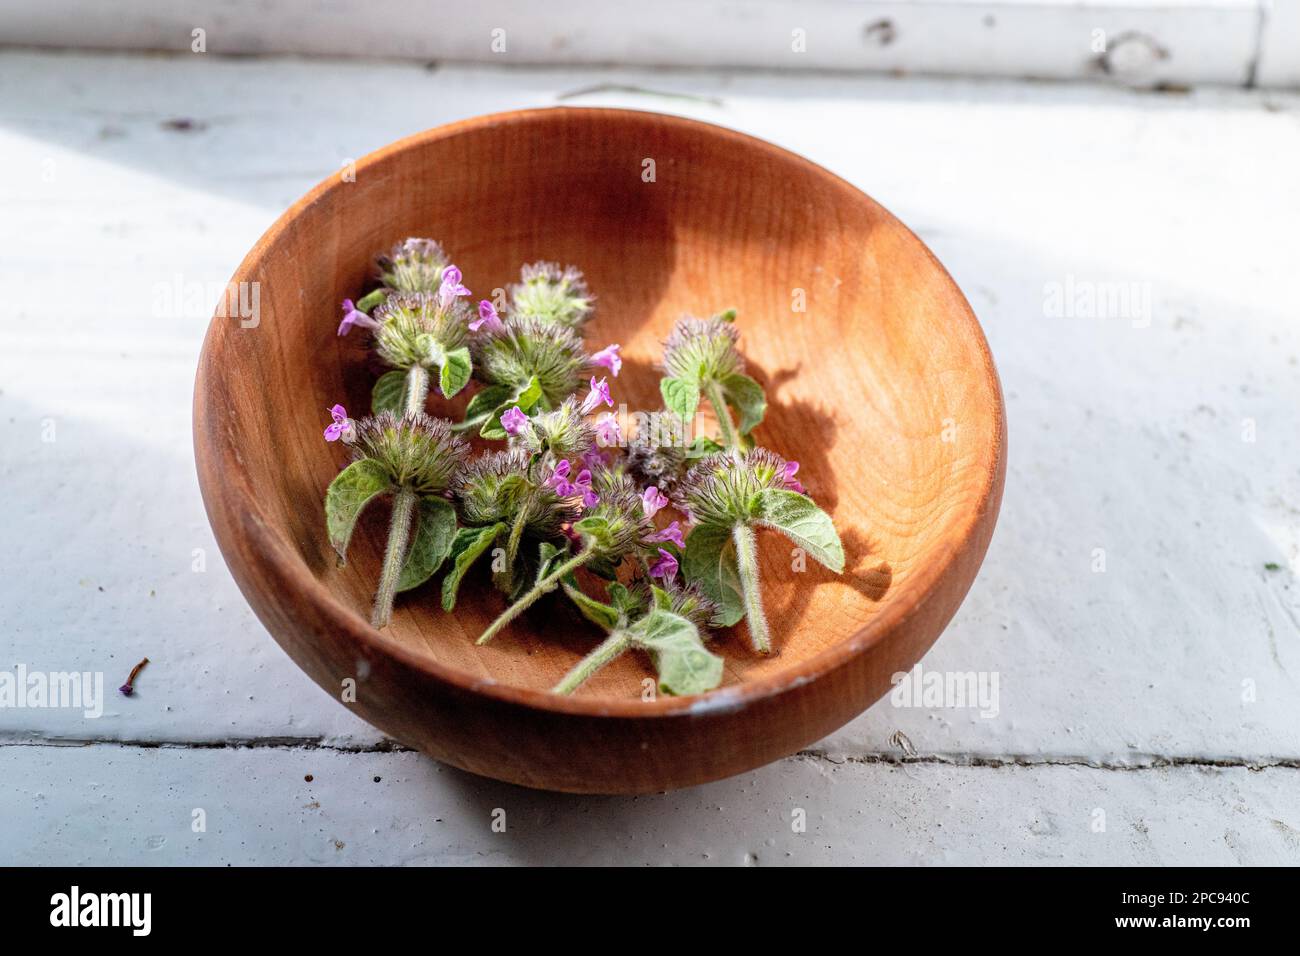 Wooden eco plate with pink flowers Wild Basil or Clinopodium vulgare of a medicinal plant collected during flowering in summer Stock Photo